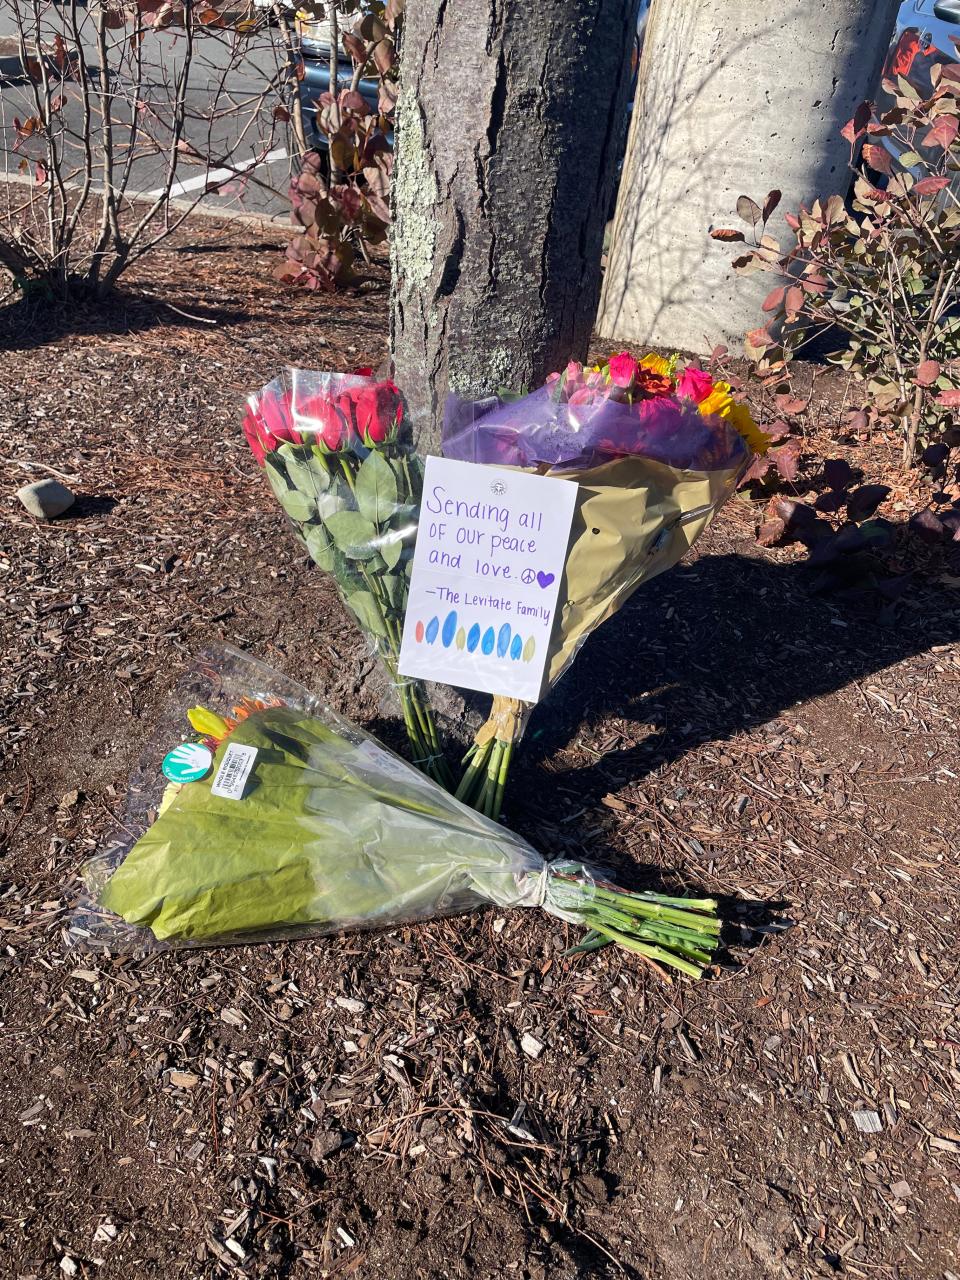 A collection of flowers left Tuesday for the victims of a deadly crash at Derby Street Shops in Hingham Monday, Nov. 21, 2022.